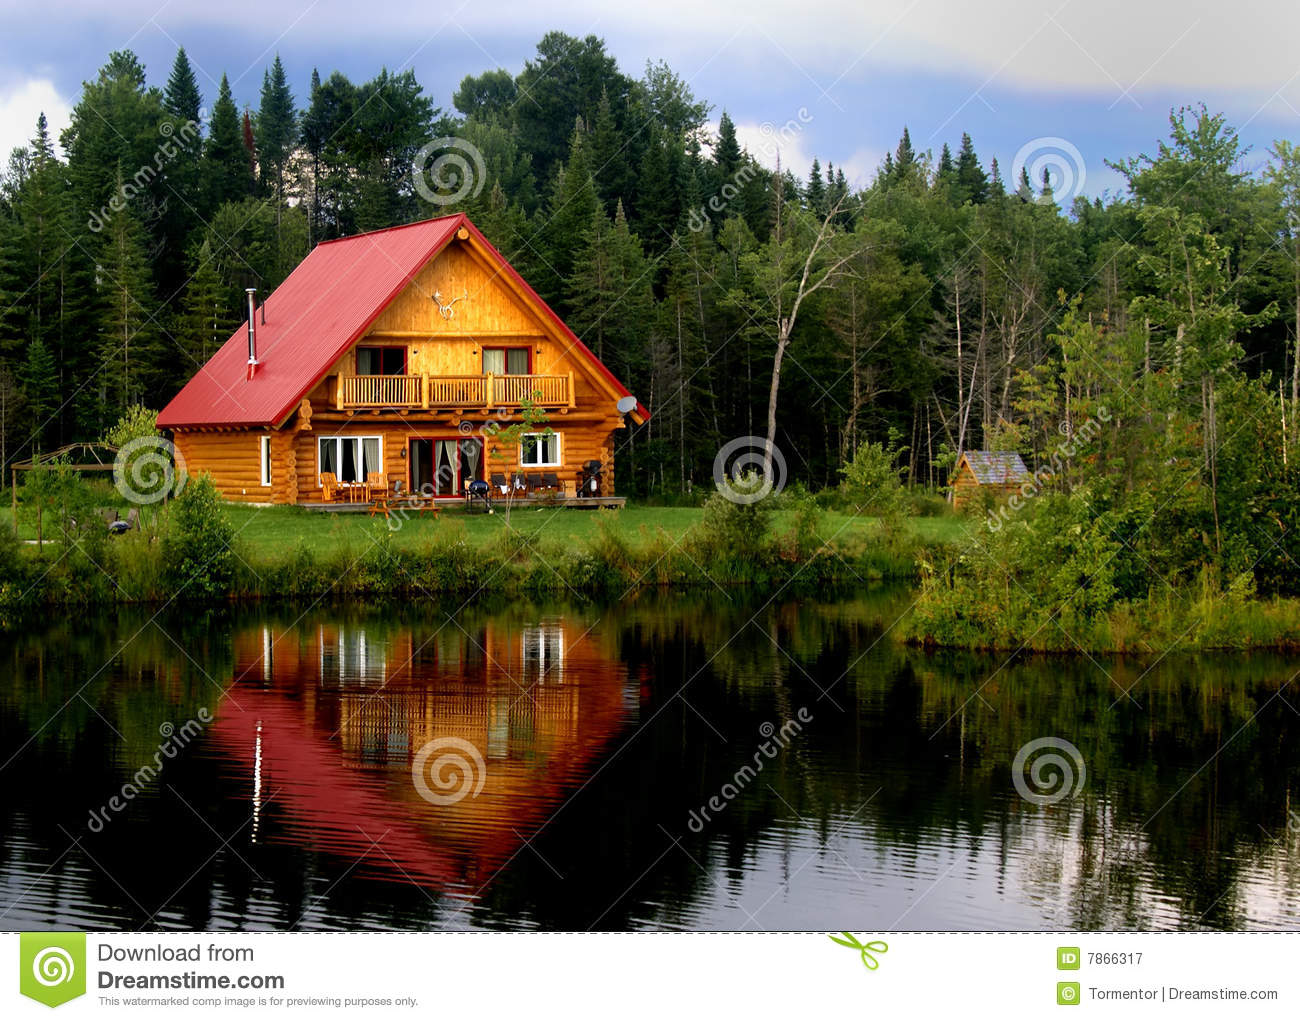 Log Cabin On A Lake Royalty Free Stock Photography   Image  7866317